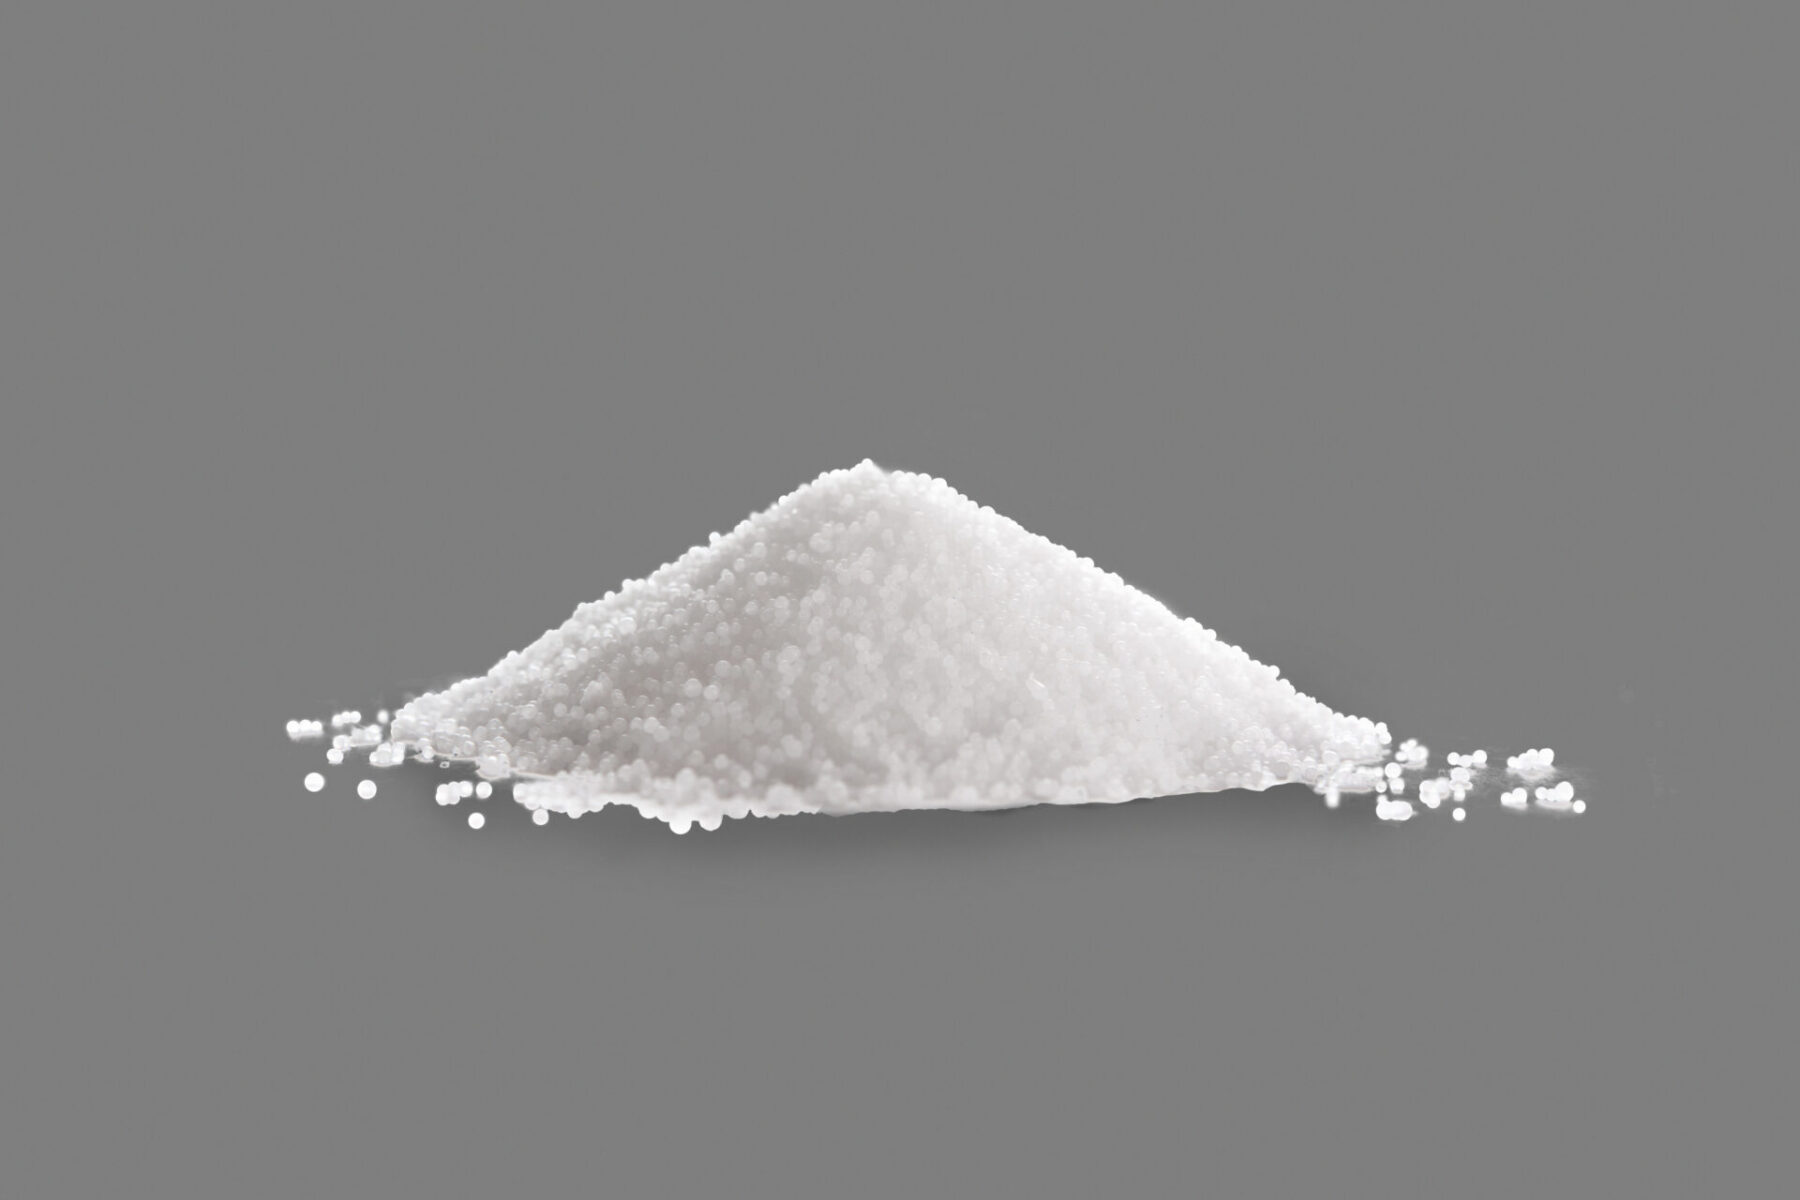 Caustic Soda, Specialty Industries